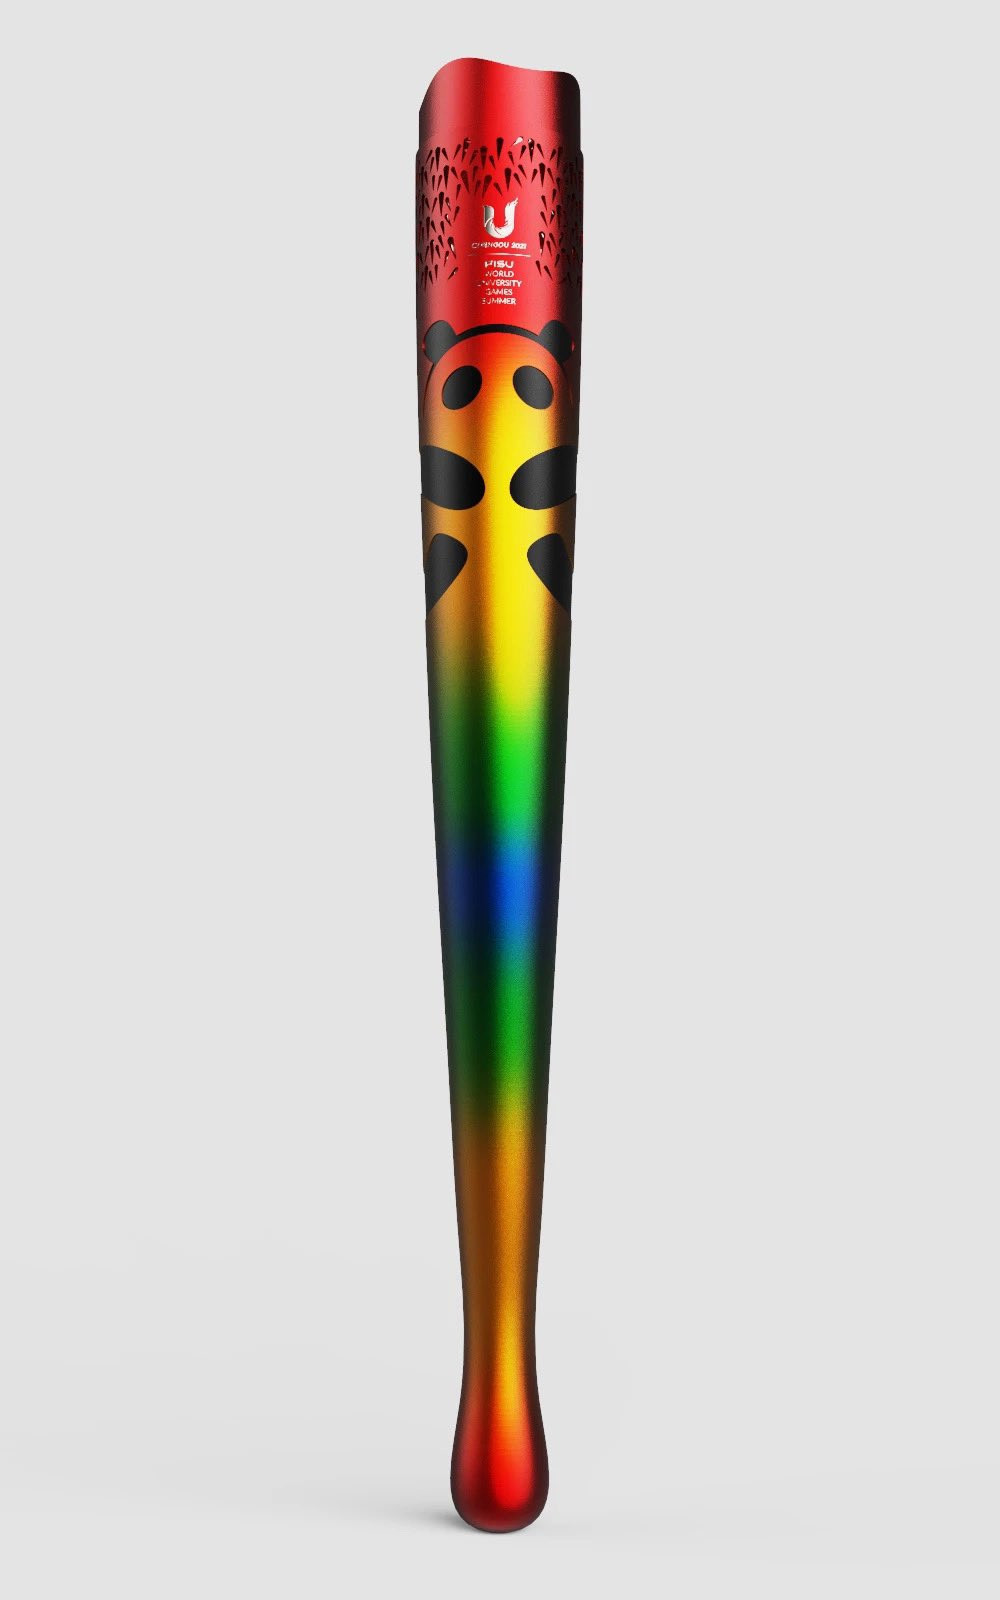 The Chengdu 2021 Torch has been unveiled for the first time ©Chengdu 2021 